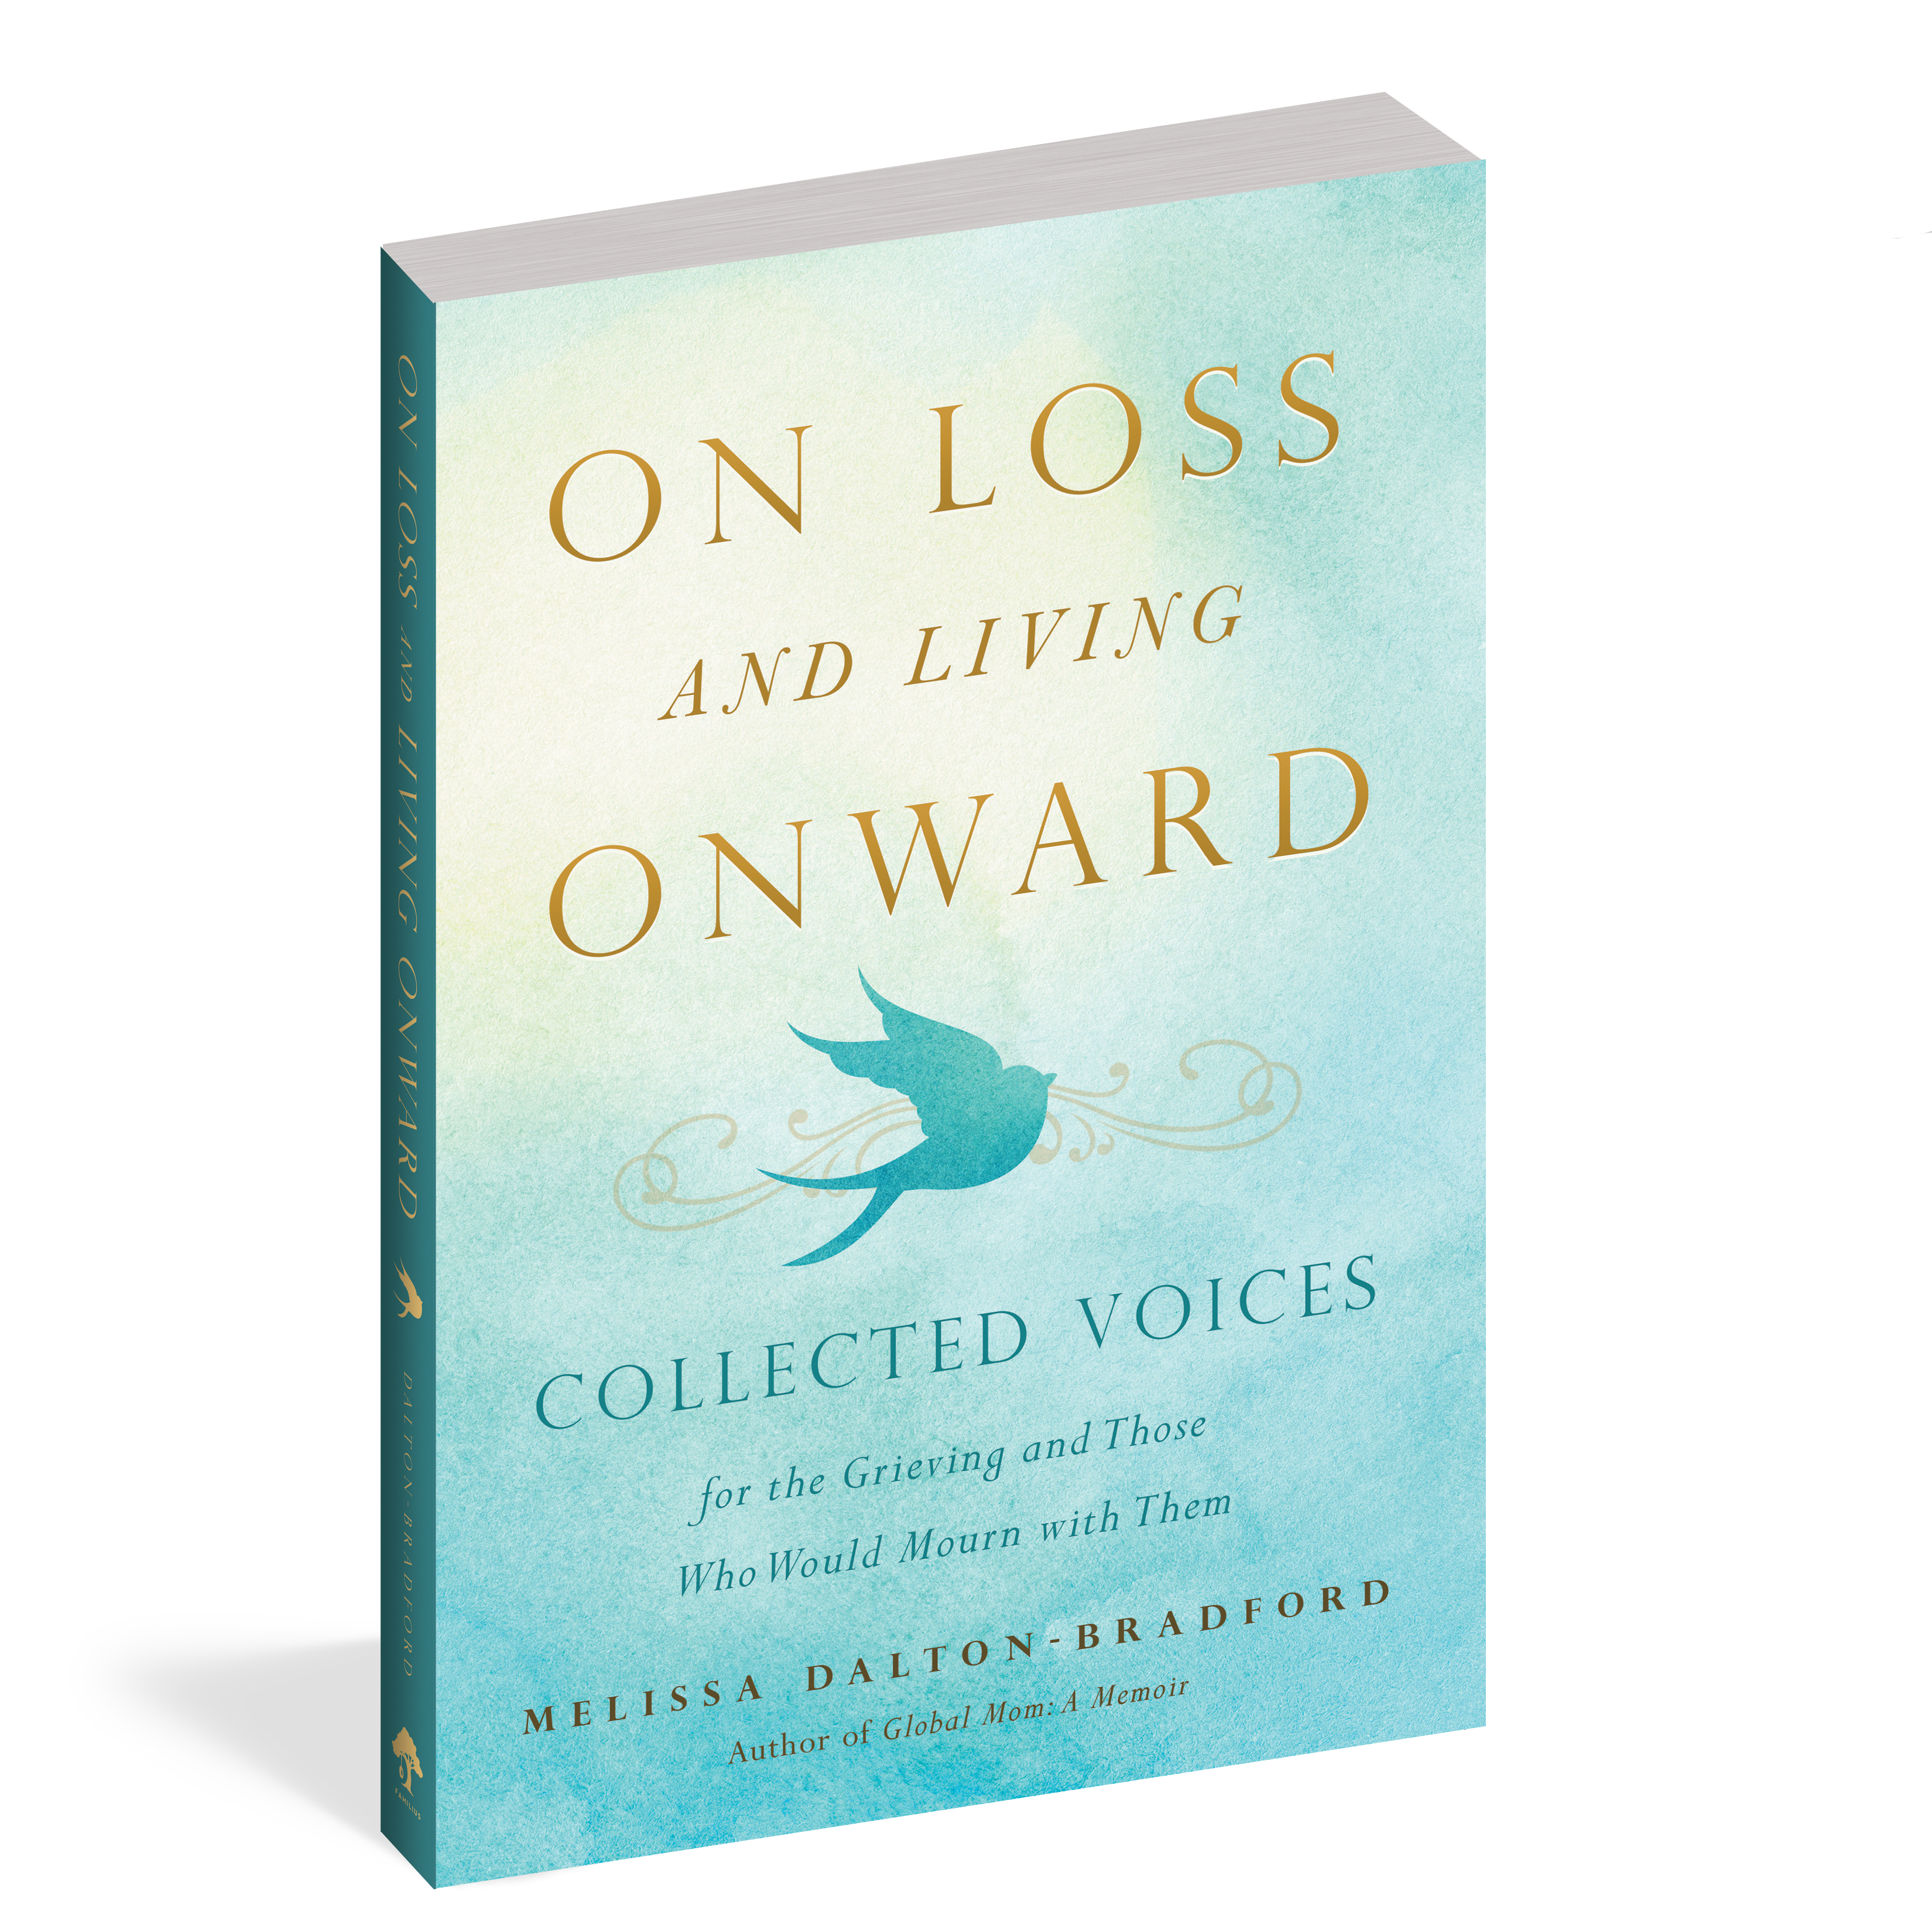 The cover of the book On Loss and Living Onward.